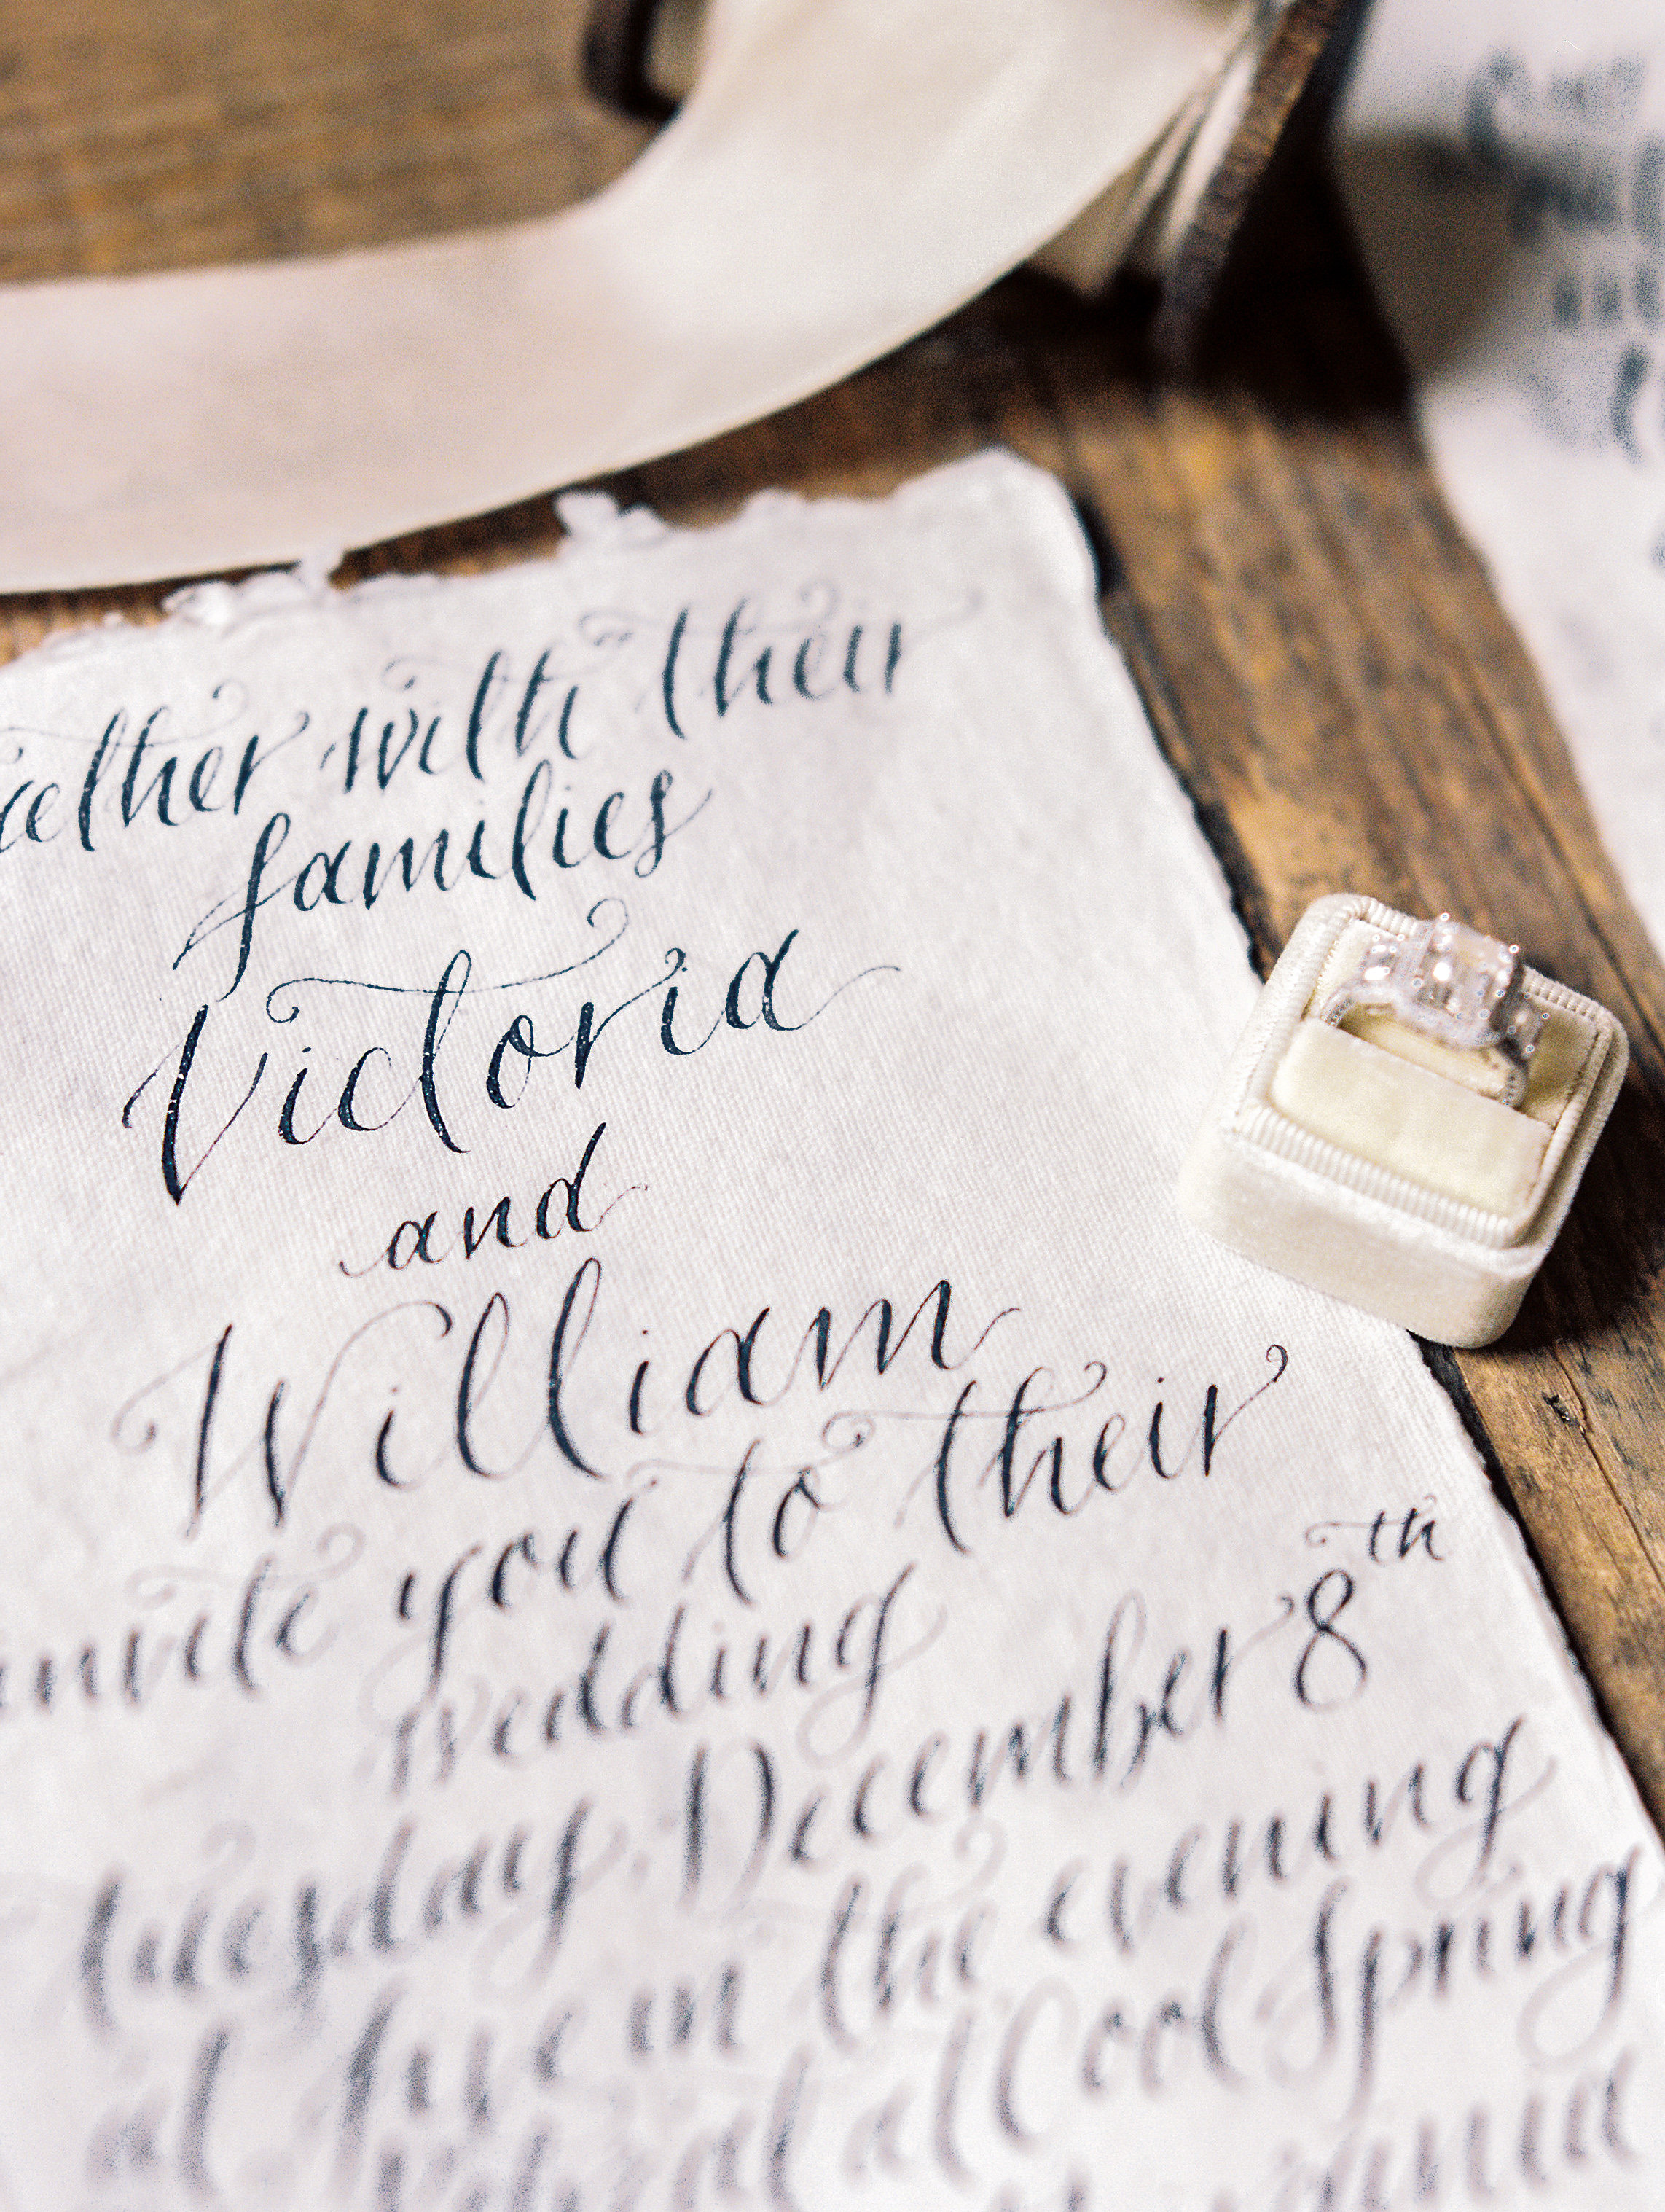 Photography: Lissa Ryan Photography | Planning: The Velvet Veil | Paper & Calligraphy: Spurlé Gul Studio | Ring: Pave Jewelers